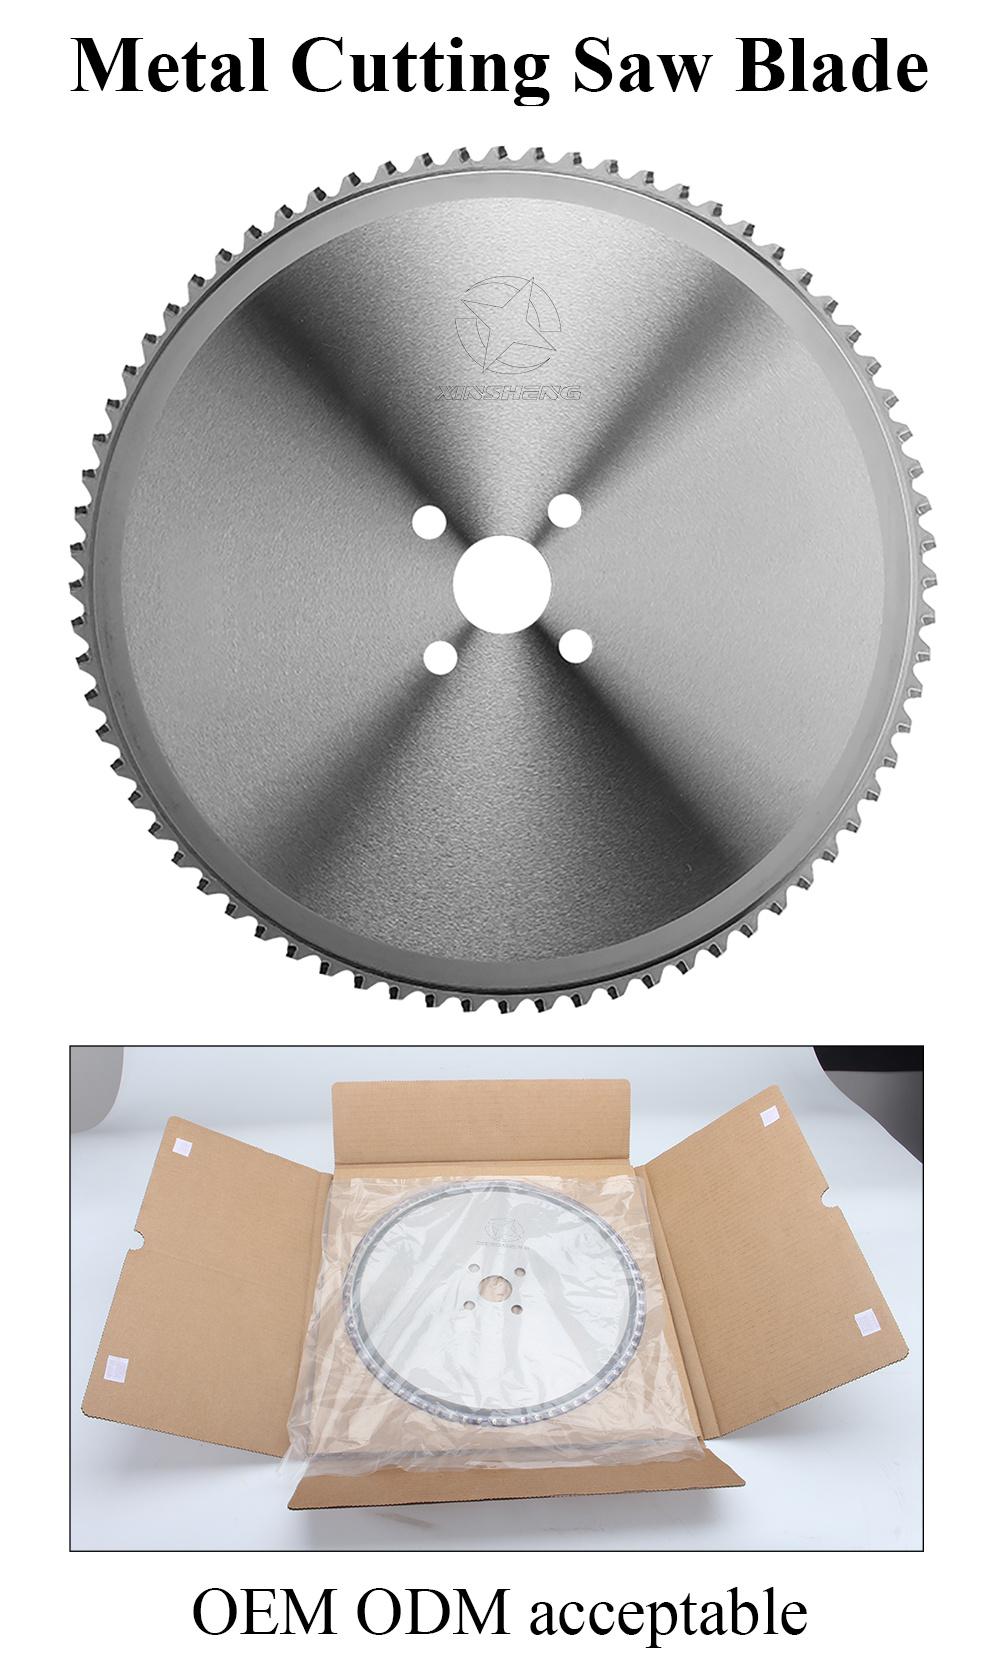 Carbide Tipped Tct Circular Saw Blade for Steel Cut